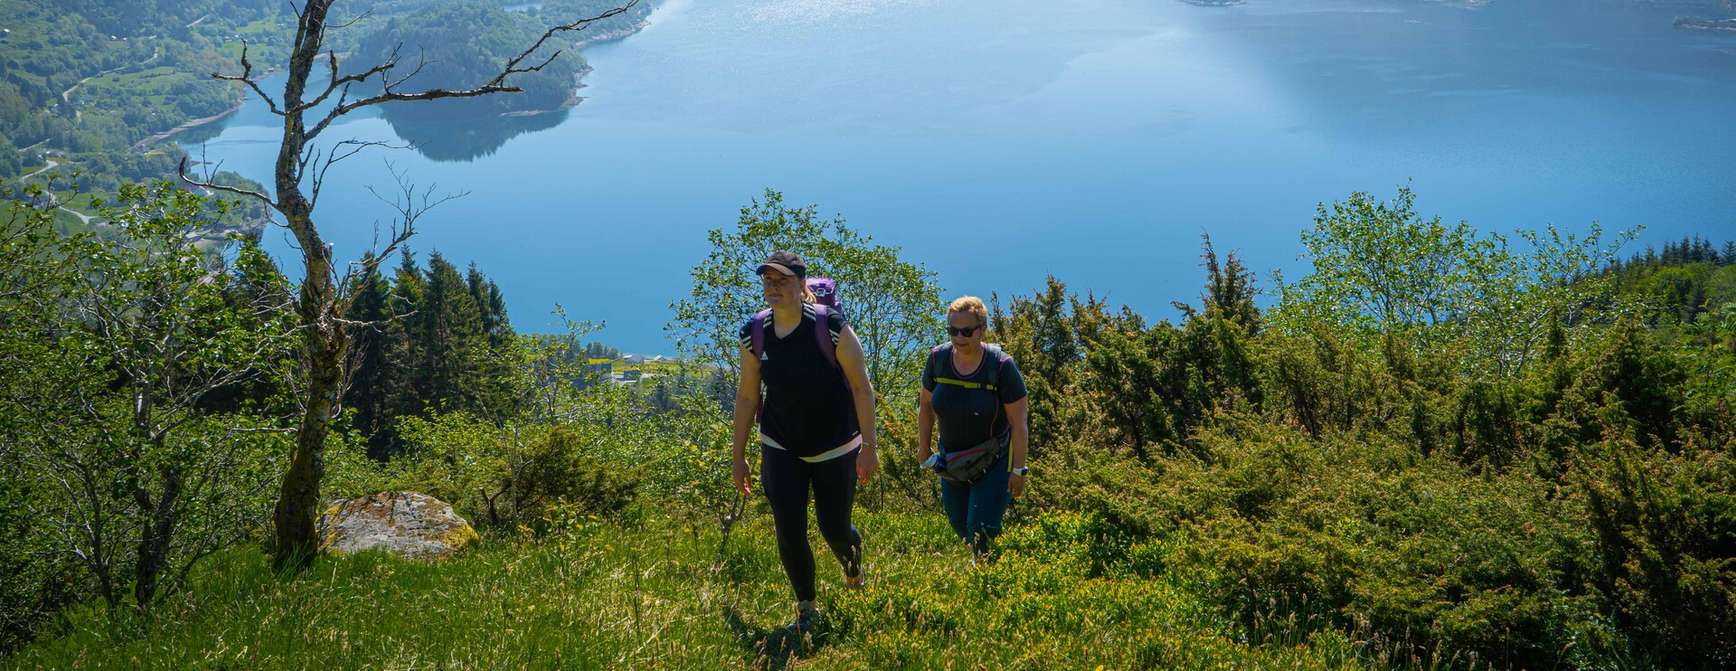 Two women on a hike in green surroundings with a fjord and mountains in the background.